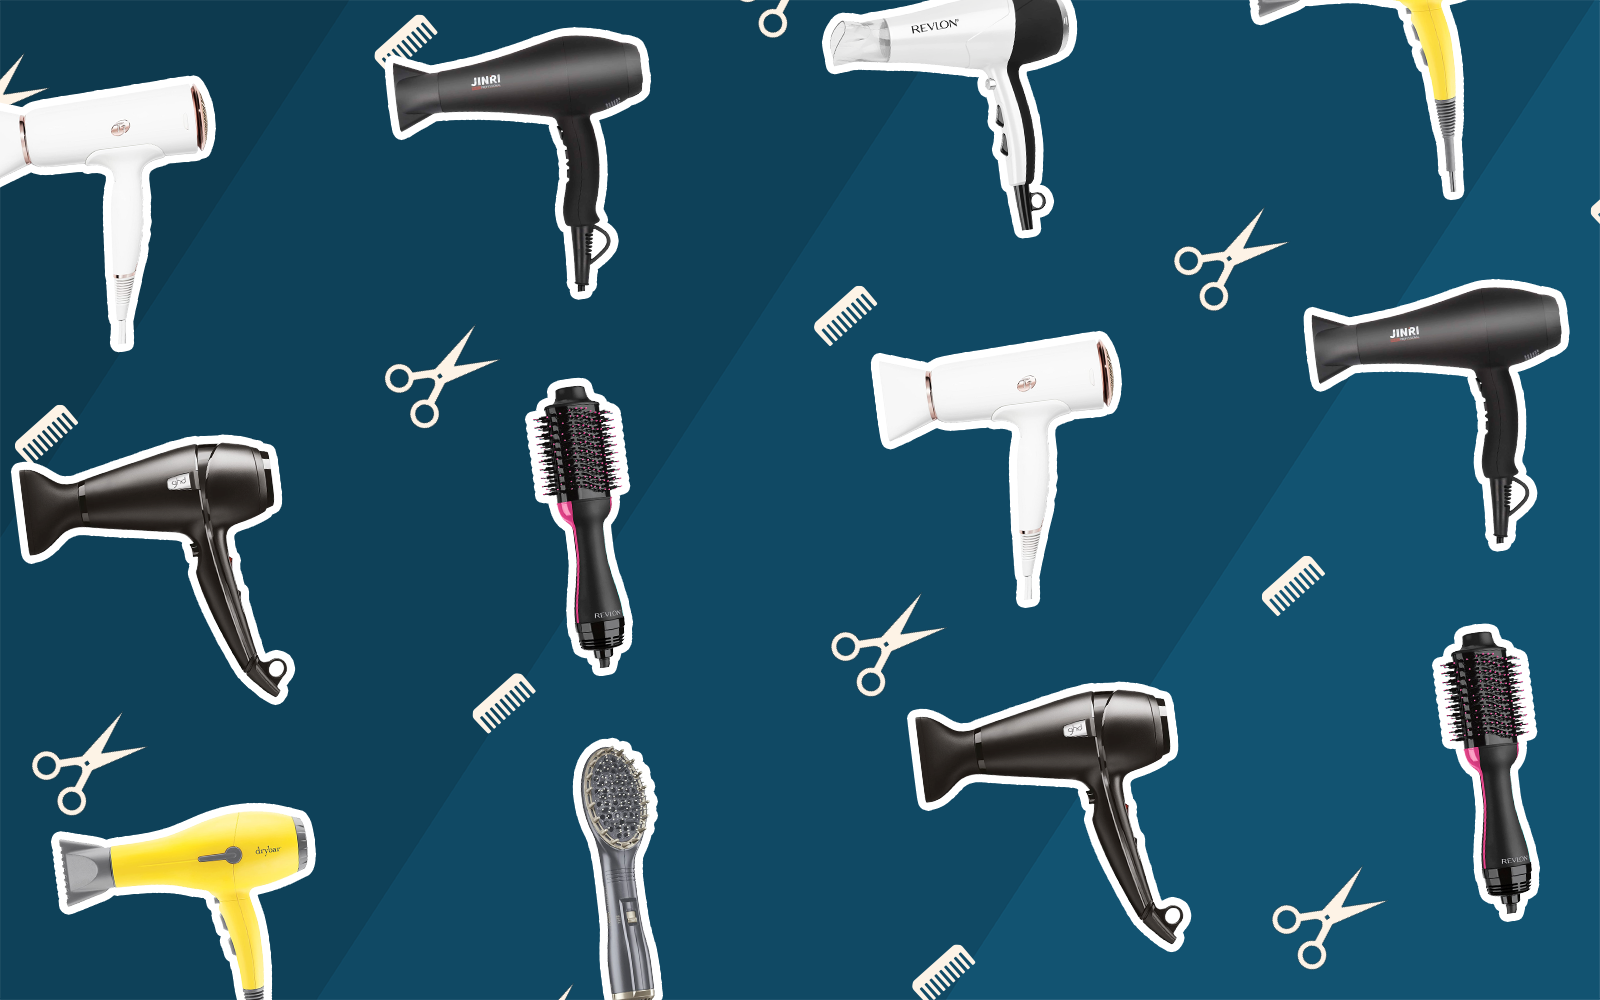 The 7 Best Hair Dryers for Straightening Hair in 2022